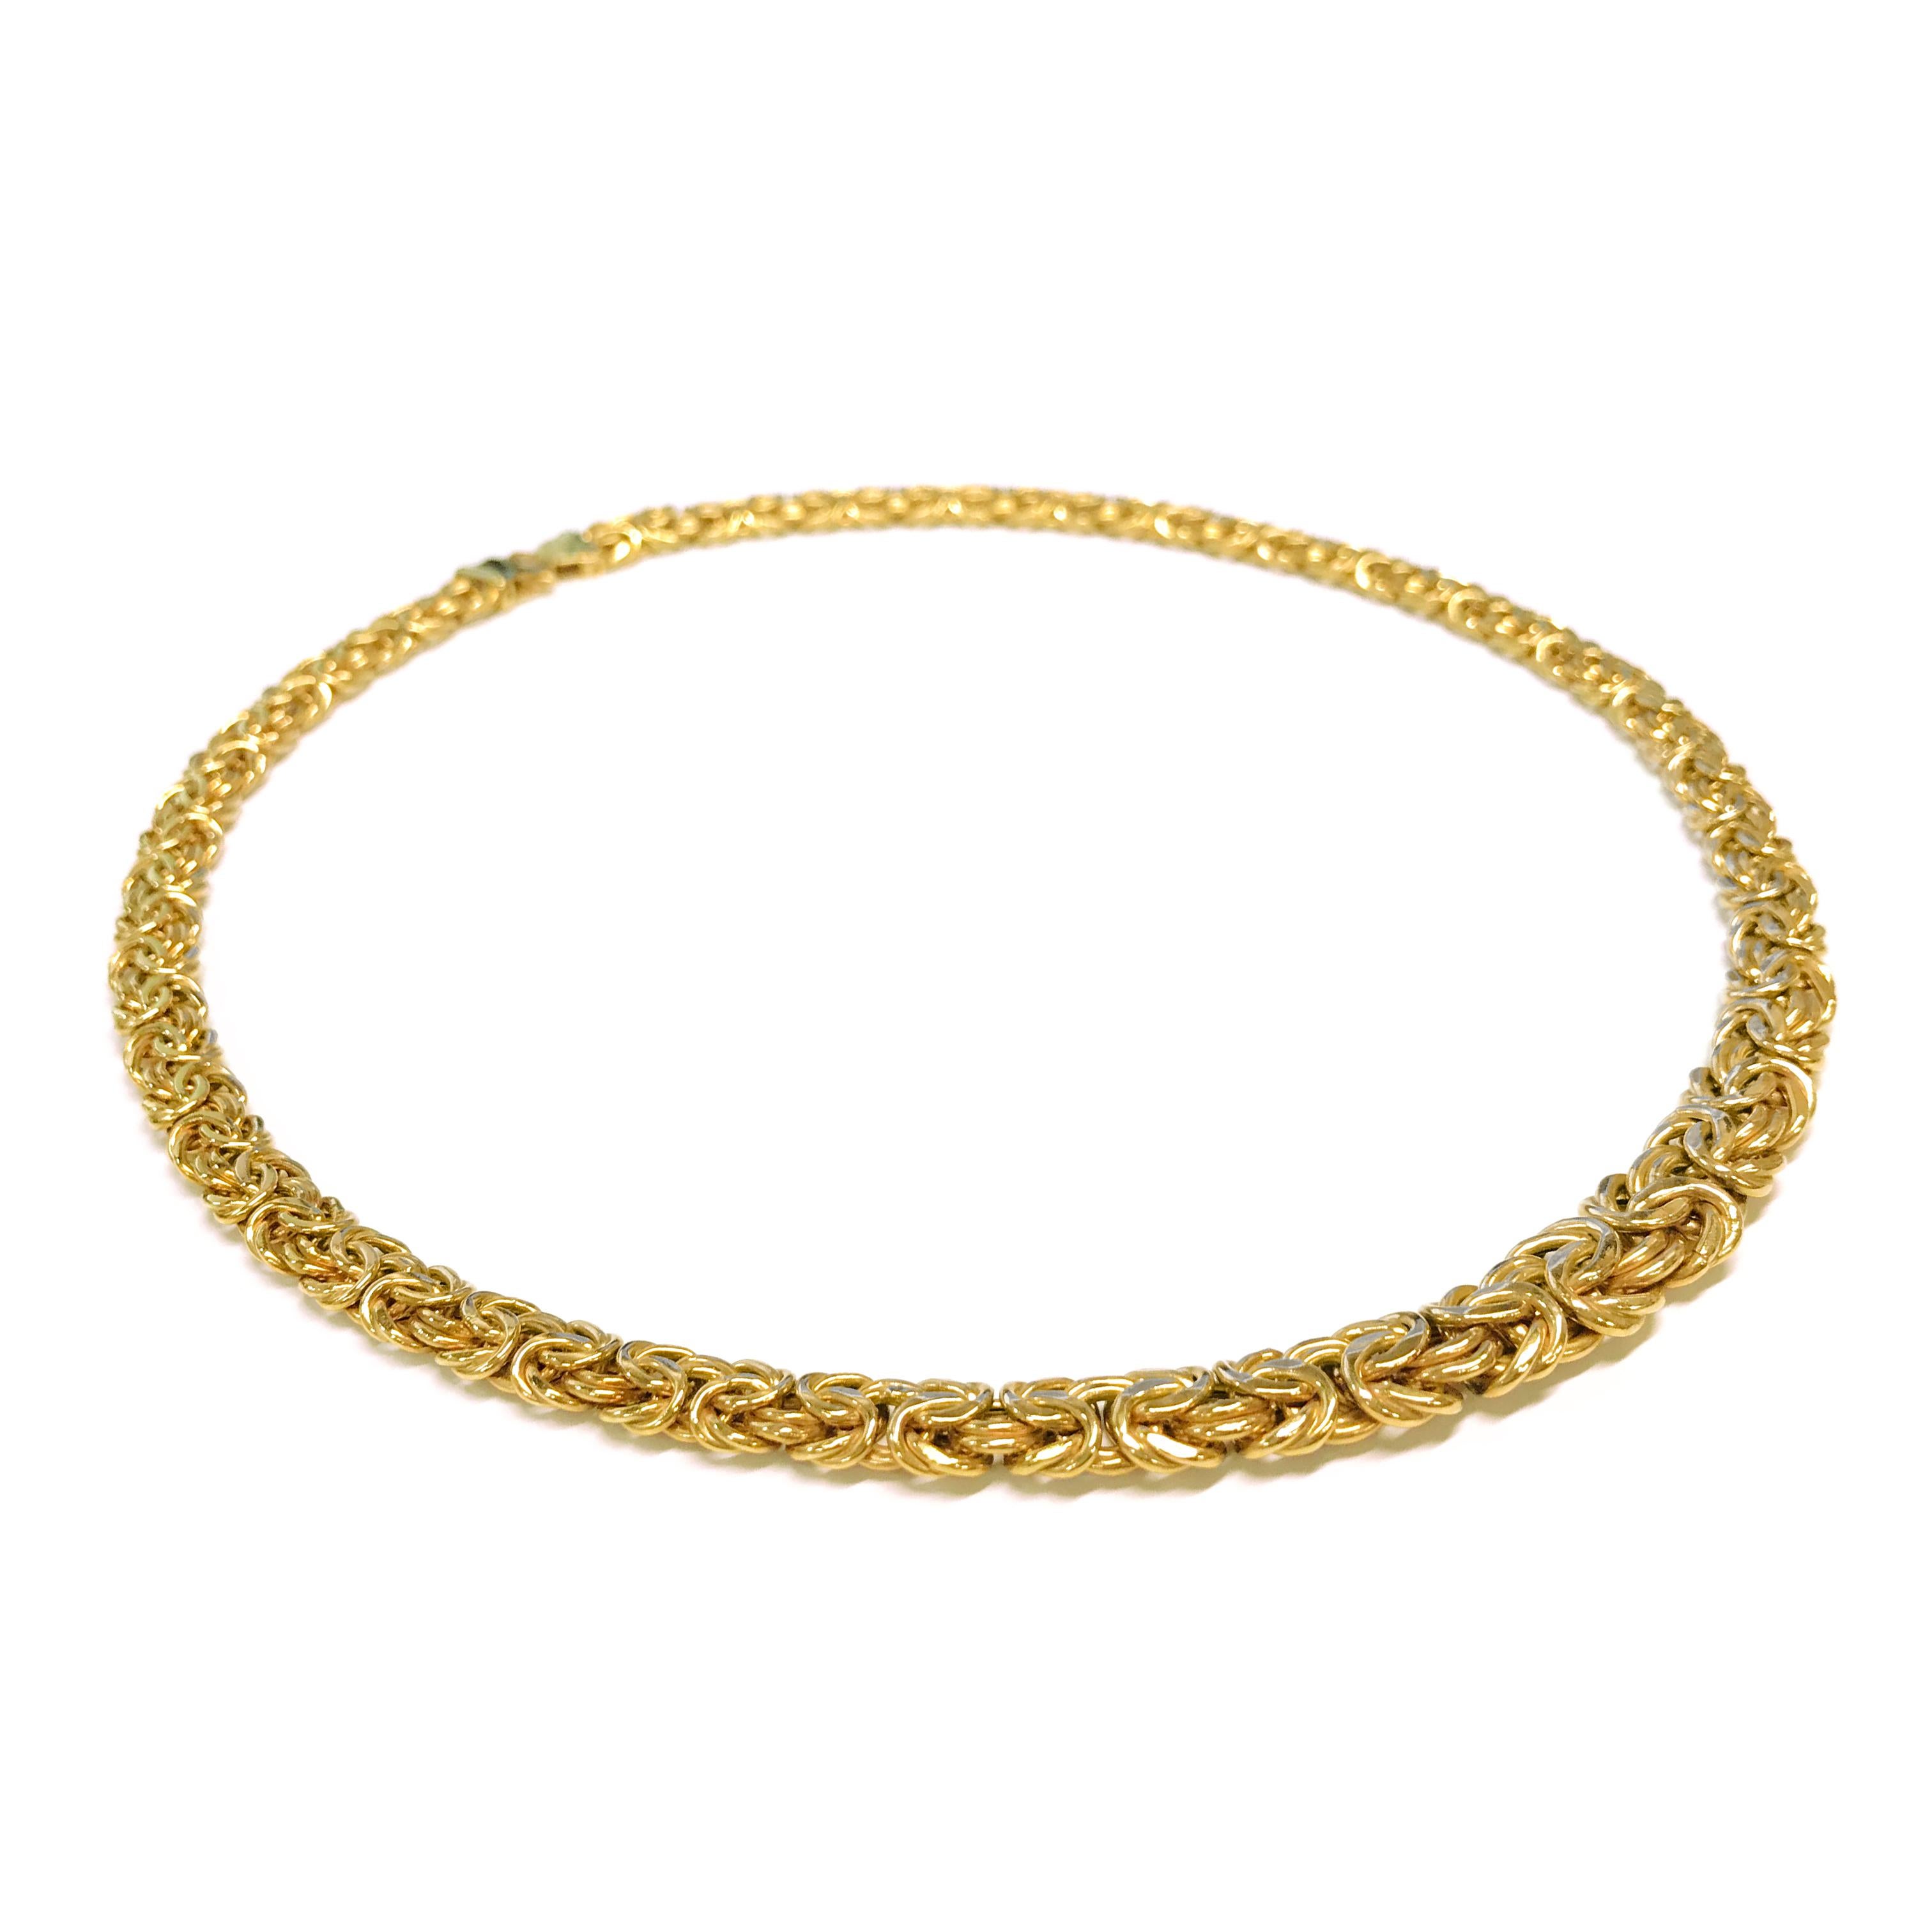 14 Karat Gold Byzantine Tapered Necklace with hollow links. The width of the necklace tapers from 7.5mm - 10.5mm. Stamped on the back of the clasp is ITALY and 14K. The total gold weight is 23.4 grams and the necklace is 18 inches long. 